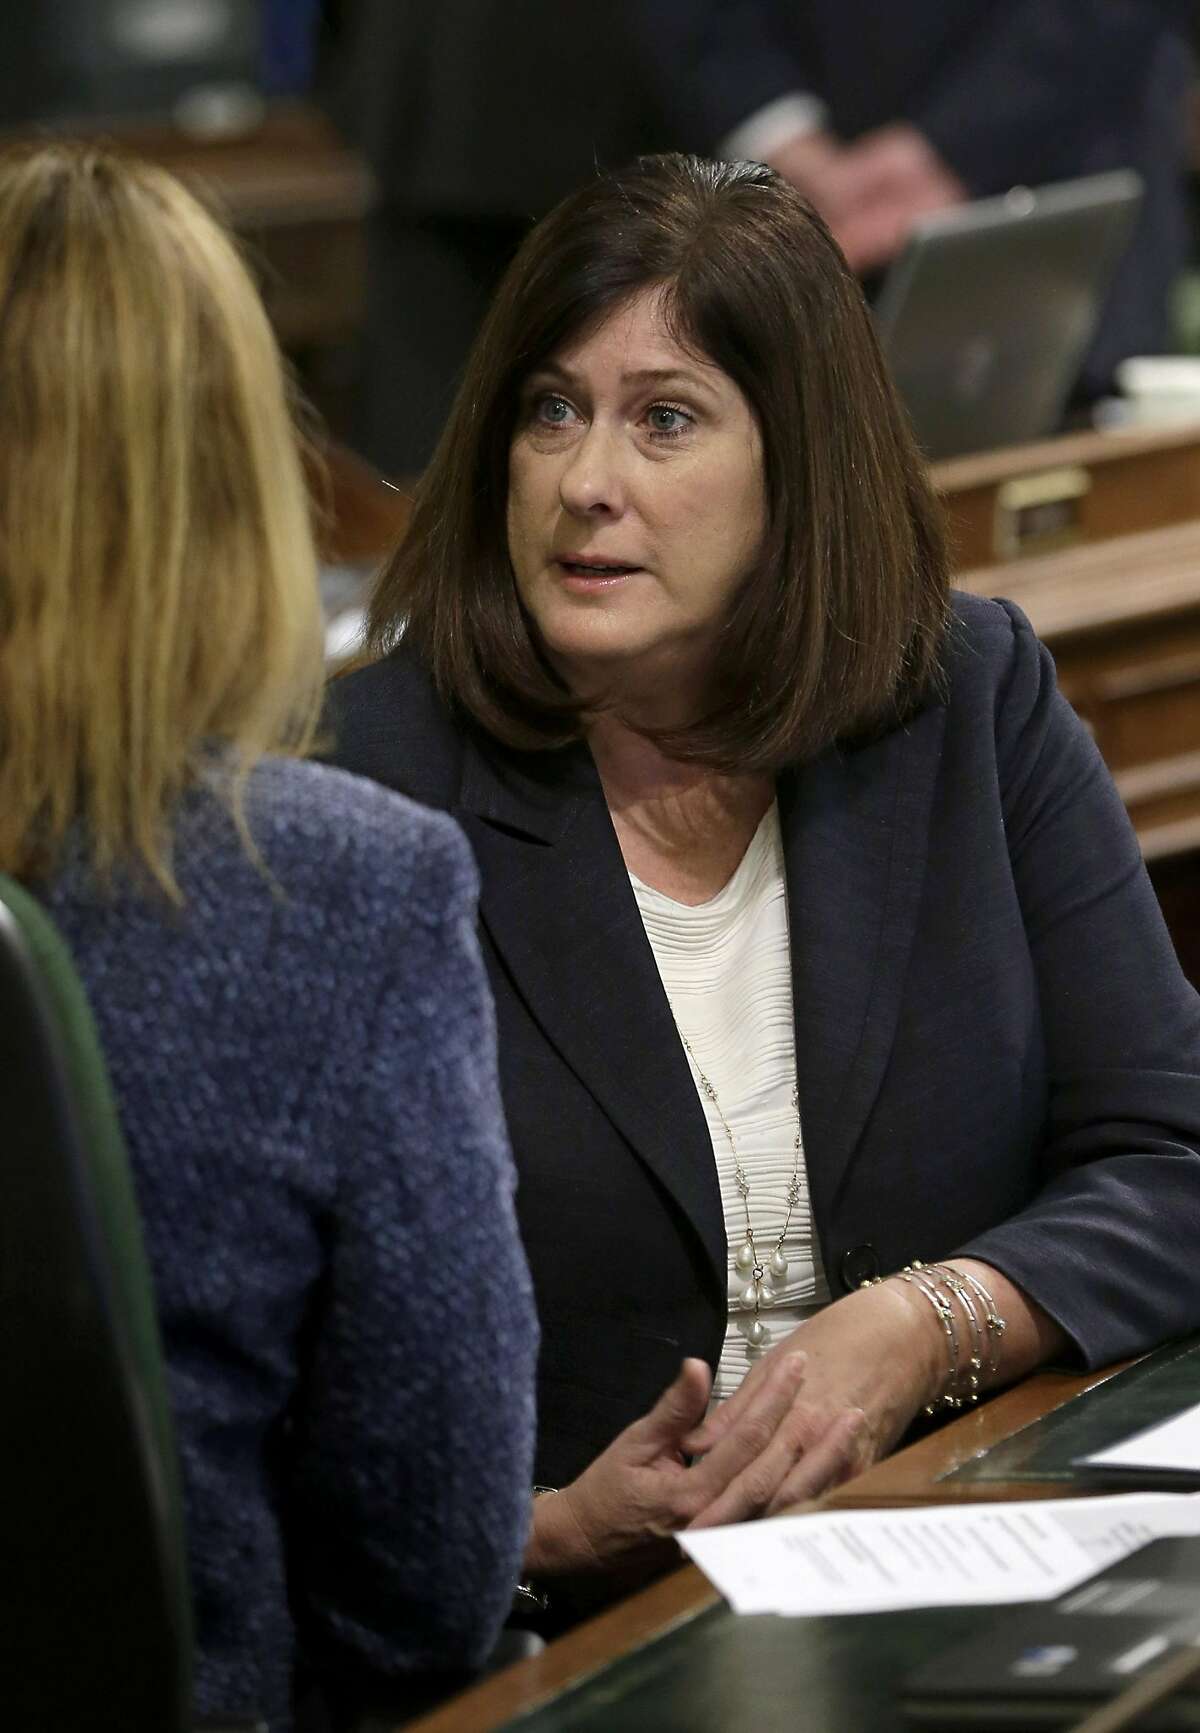 In this photo taken March 12, 2015, Assemblywoman Susan Bonilla, D-Concord, right, talks with seat mate Assemblywoman Jacqui Irwin,D-Camarillo, at the Capitol in Sacramento, Calif. Bonilla and Democratic challenger, Orinda Mayor Steve Glazer are facing off in a special election to fill the 7th Senate District seat, Tuesday, May 19, 2015. (AP Photo/Rich Pedroncelli, file)